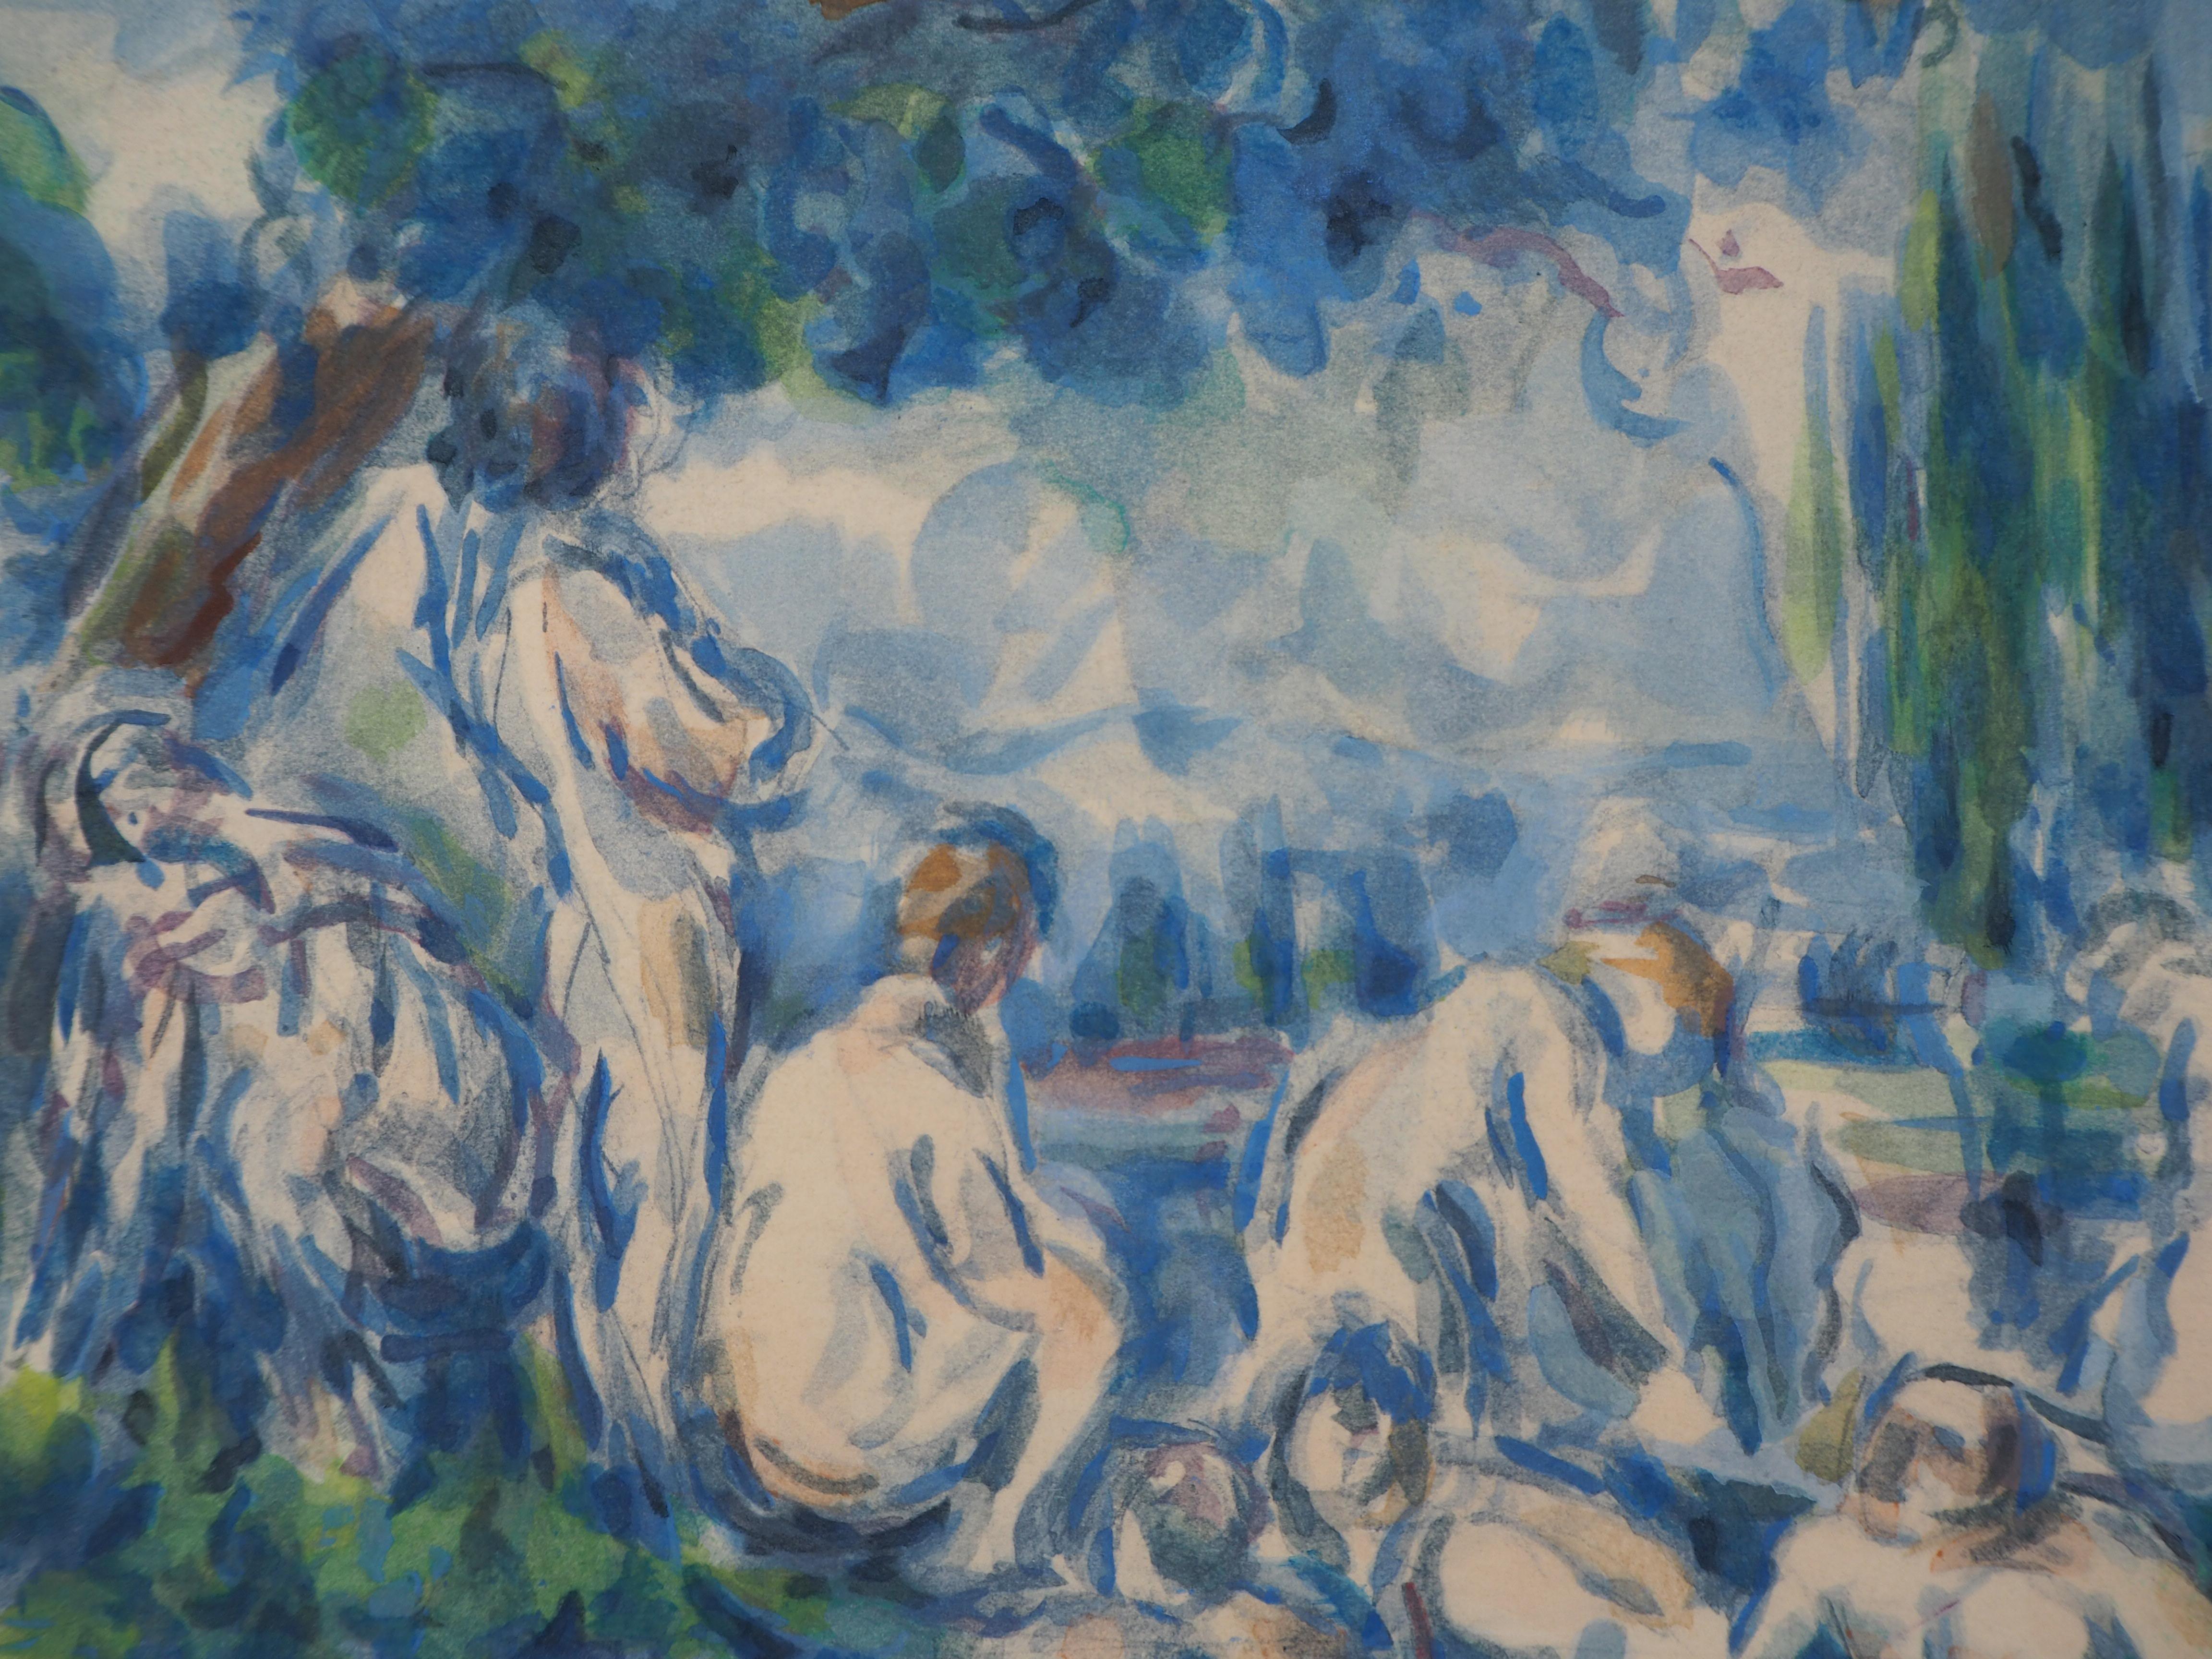 Bathers in the Shade of a Tree - Lithograph and Stencil Watercolor, 1947 - Impressionist Print by After Paul Cezanne